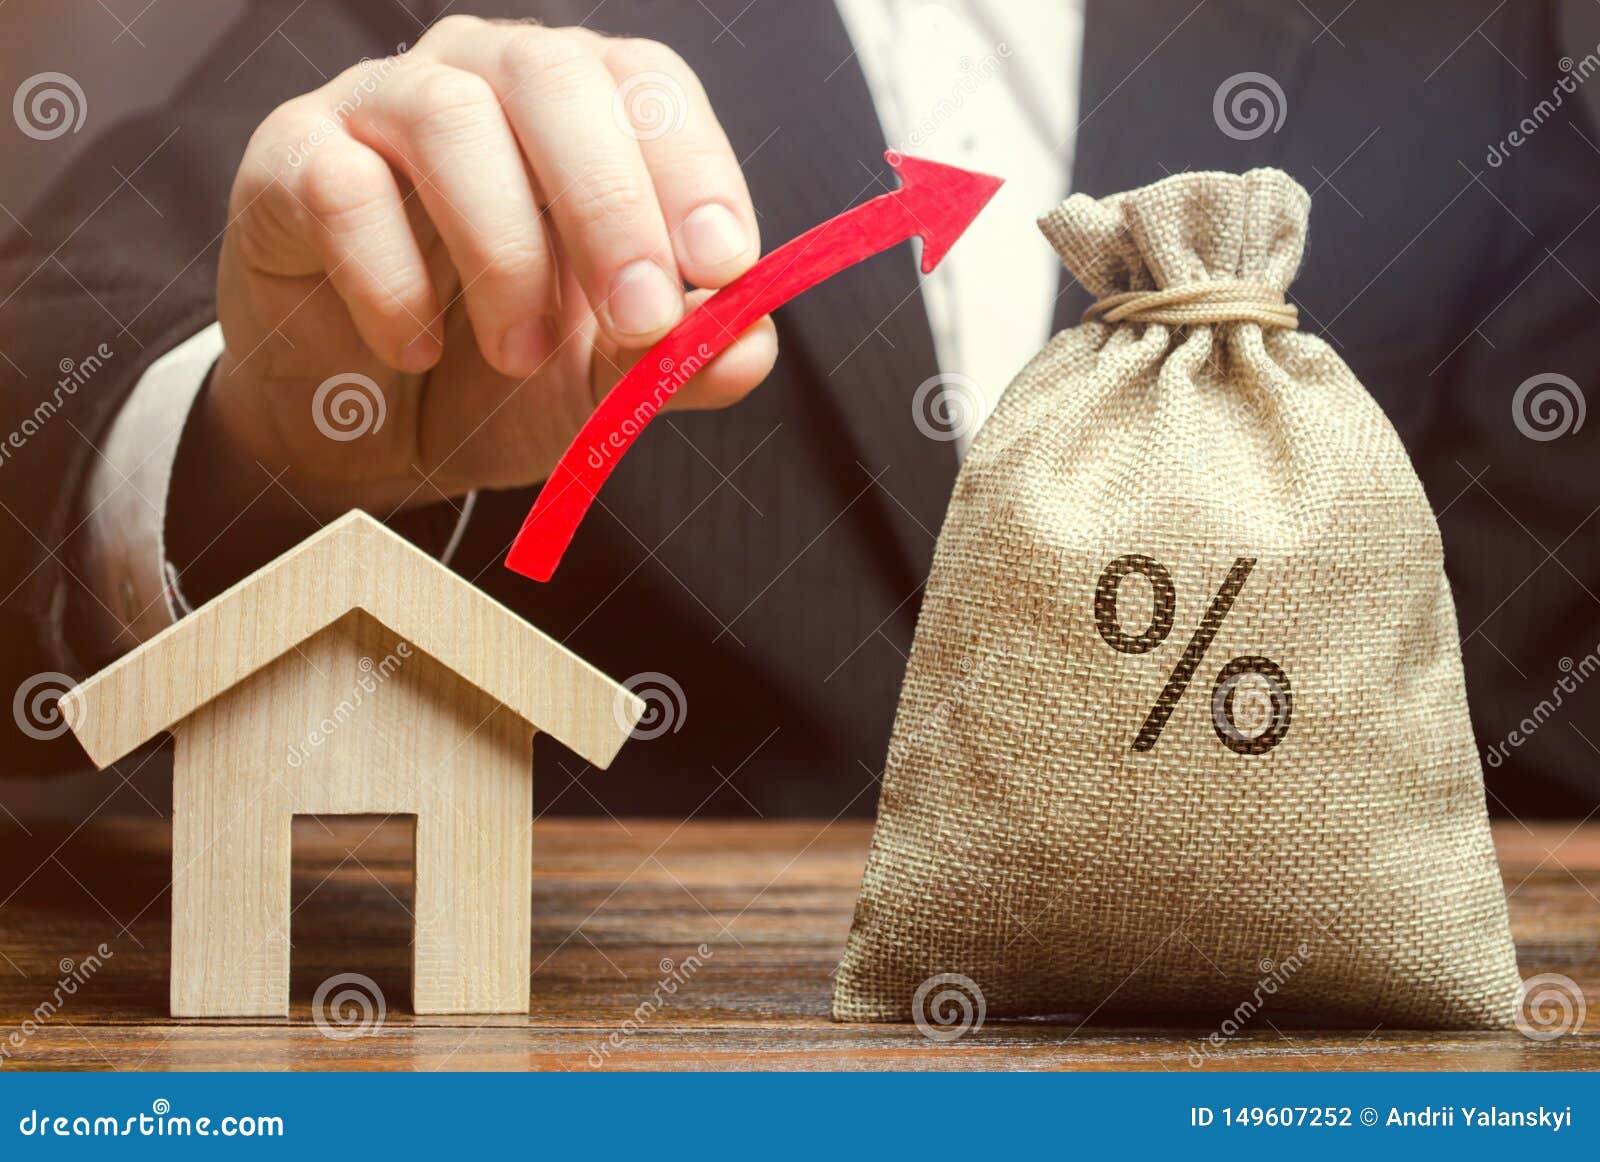 money bag with percents, up arrow and house. the concept of high interest rates on mortgage loans or rentals. the percentage of